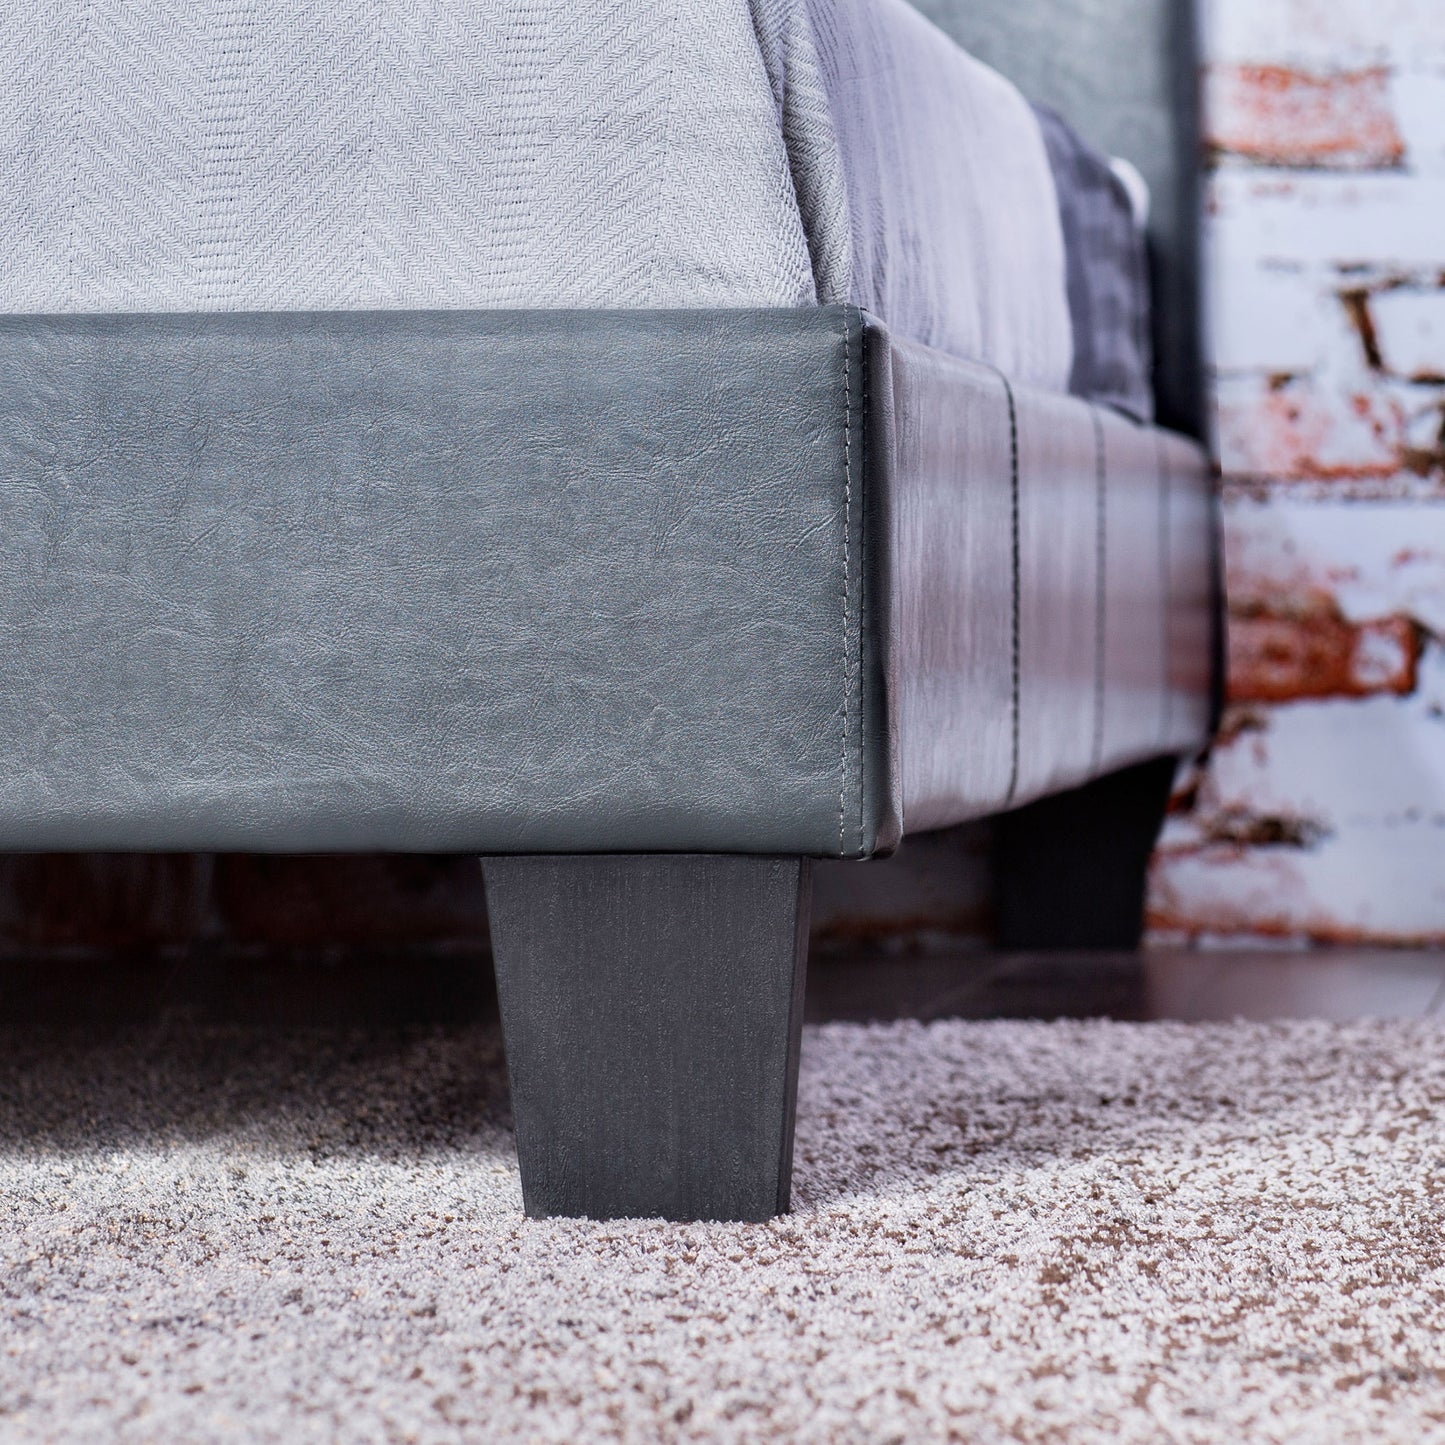 Left angled footboard/leg detail view of a contemporary gray faux leather full platform bed in a bedroom with accessories